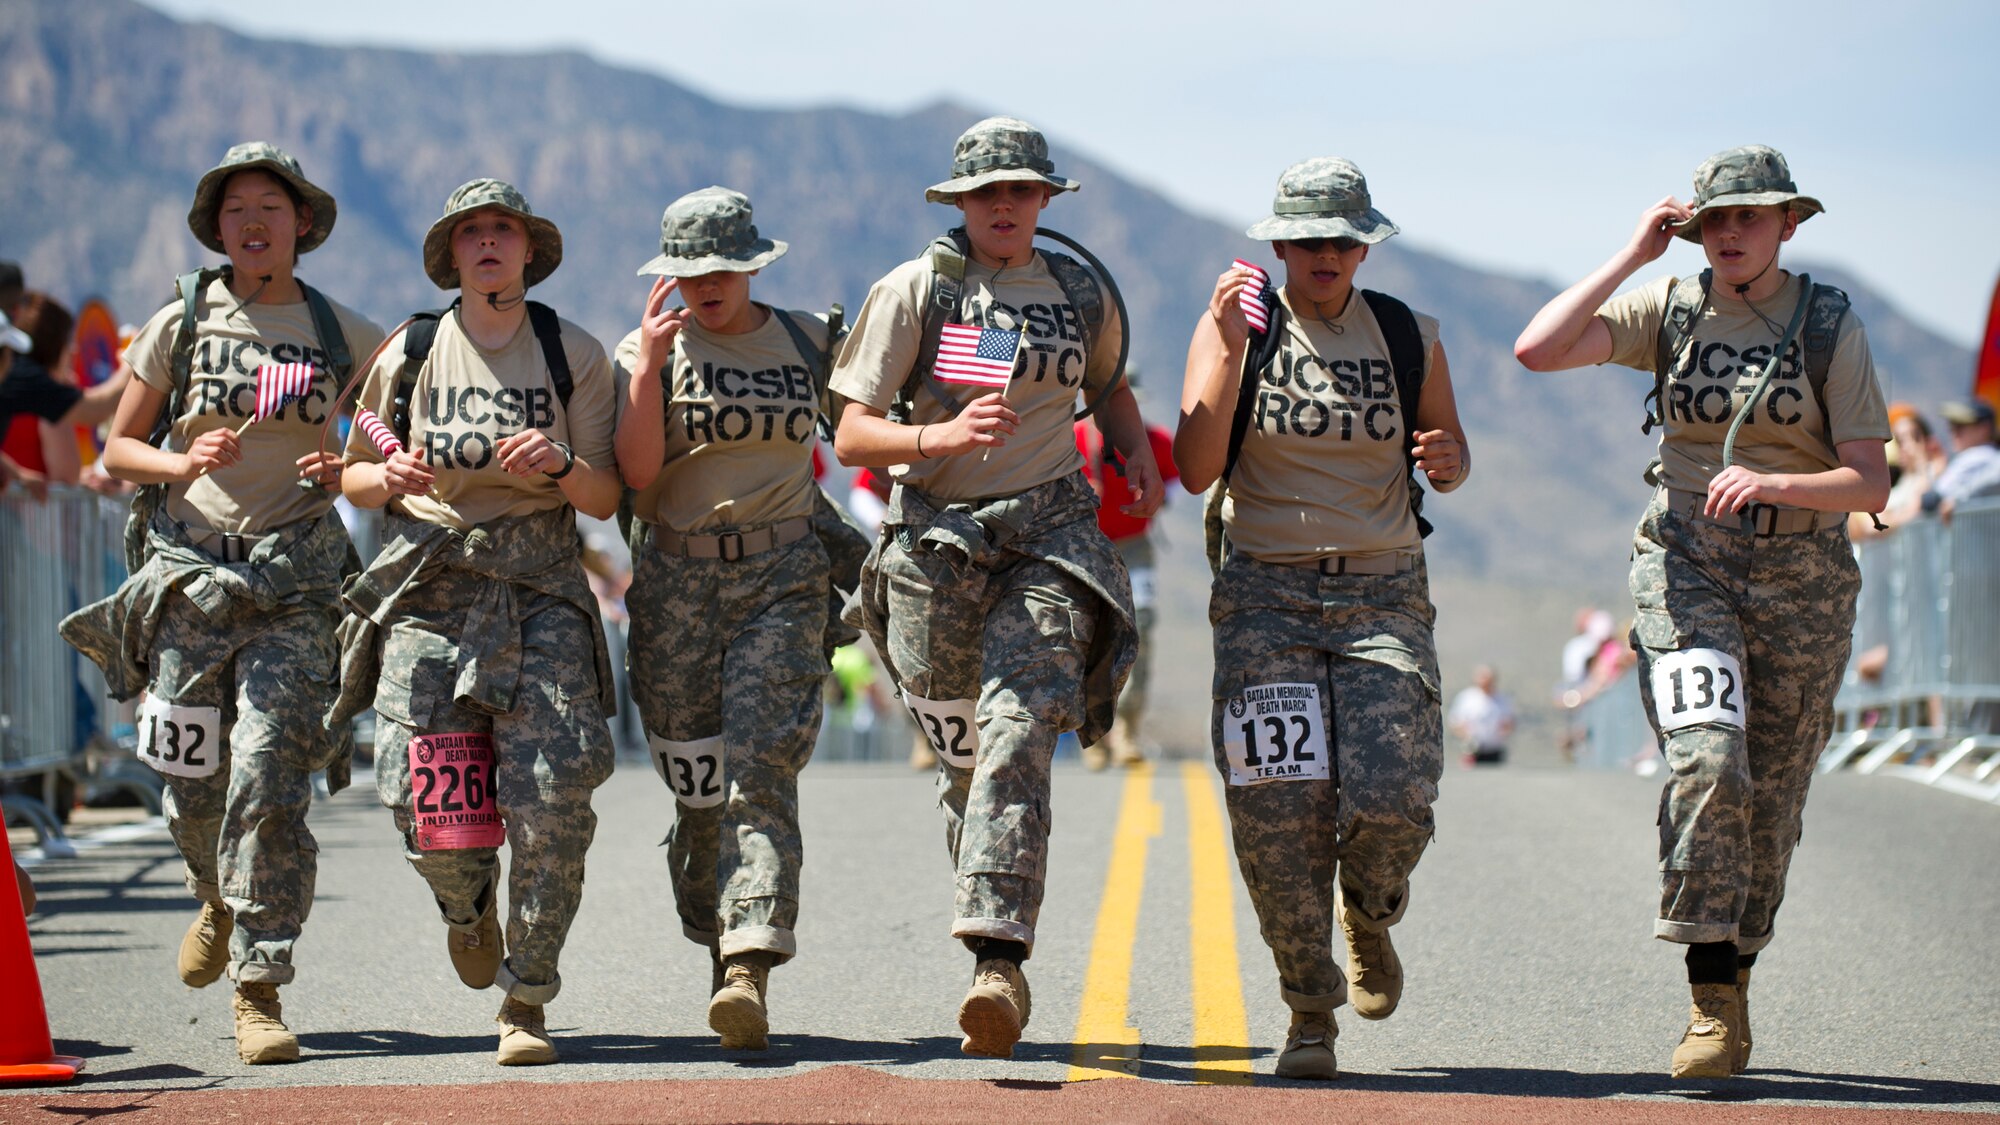 WHITE SANDS MISSILE RANGE, N.M. – University of California Santa Barbara U.S. Army Reserve Officers' Training Corps members cross the finish line of the Bataan Memorial Death March as a team here March 25.  Brandon Peer, 27, of Fort Collins, Colo., was the first ROTC participant to finish the marathon in the ROTC - heavy category, with a chip time of 5:58:28; Alexander Babos, 19, of Fort Collins, Colo., was the first in the ROTC - light category, with a chip time of 3:53:44. (U.S. Air Force photo by Airman 1st Class Daniel E. Liddicoet/Released)